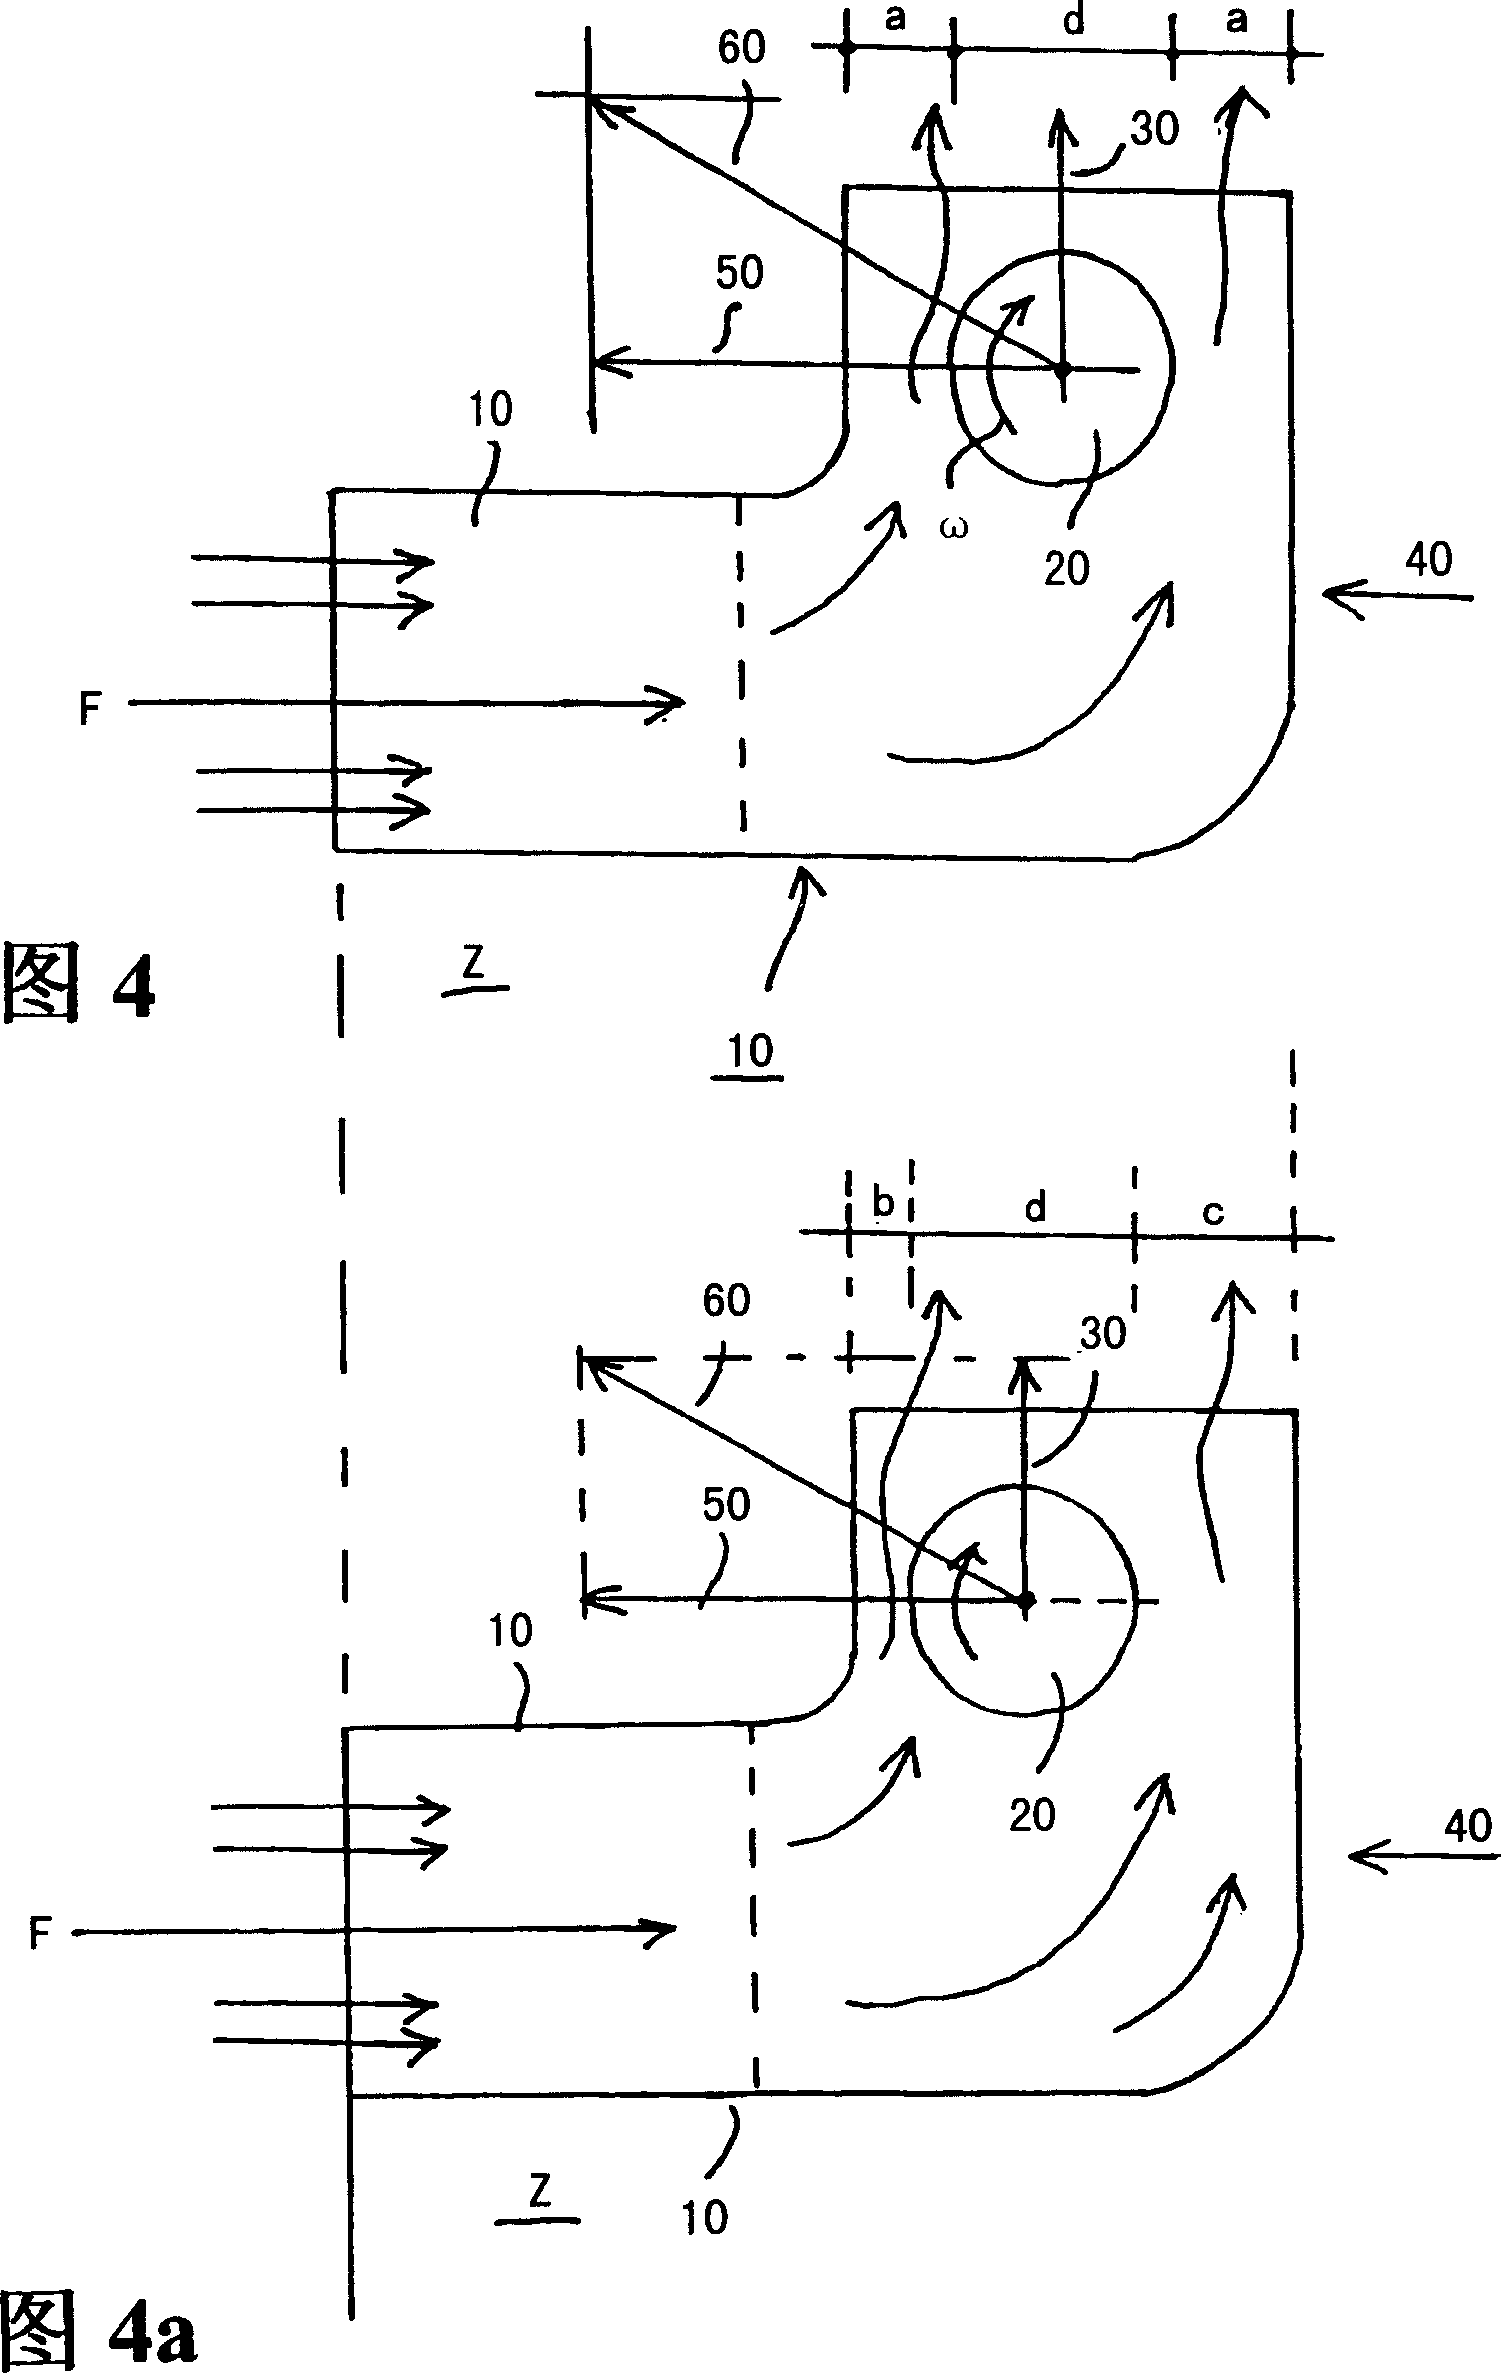 Additional drive system by diverting a fluid flow